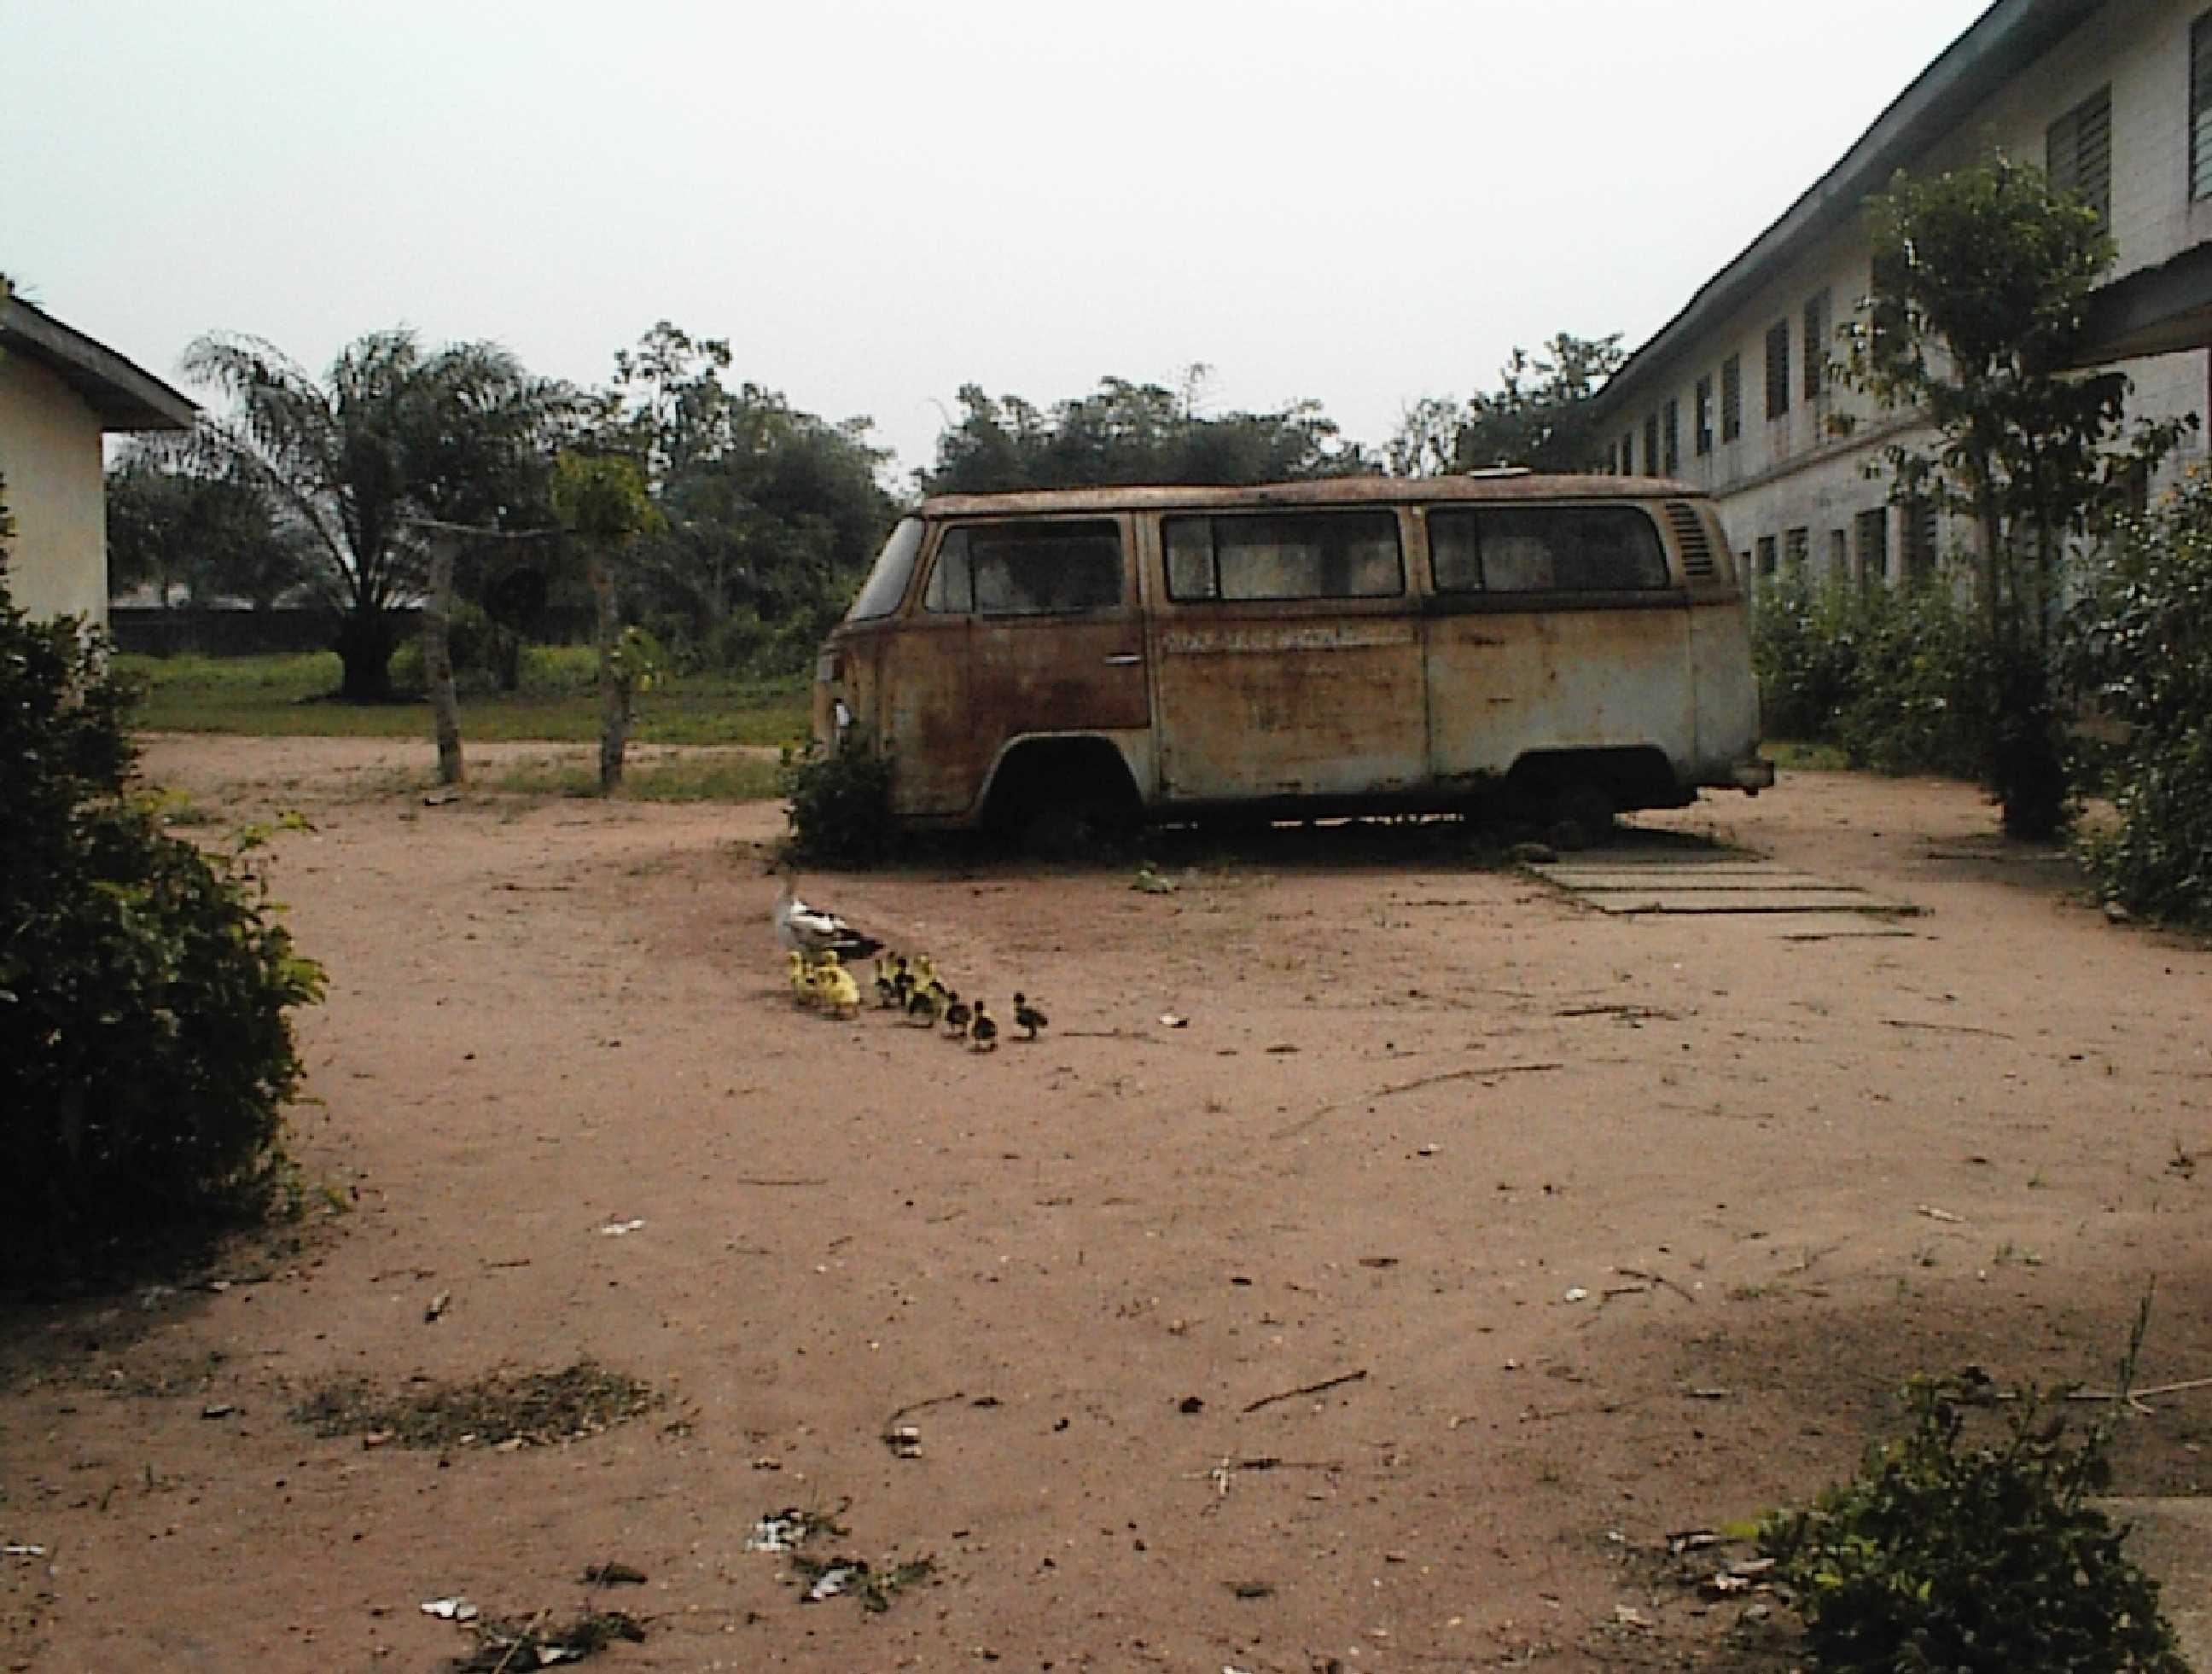 An abandoned bus that served as a place for storage in Mbawsi